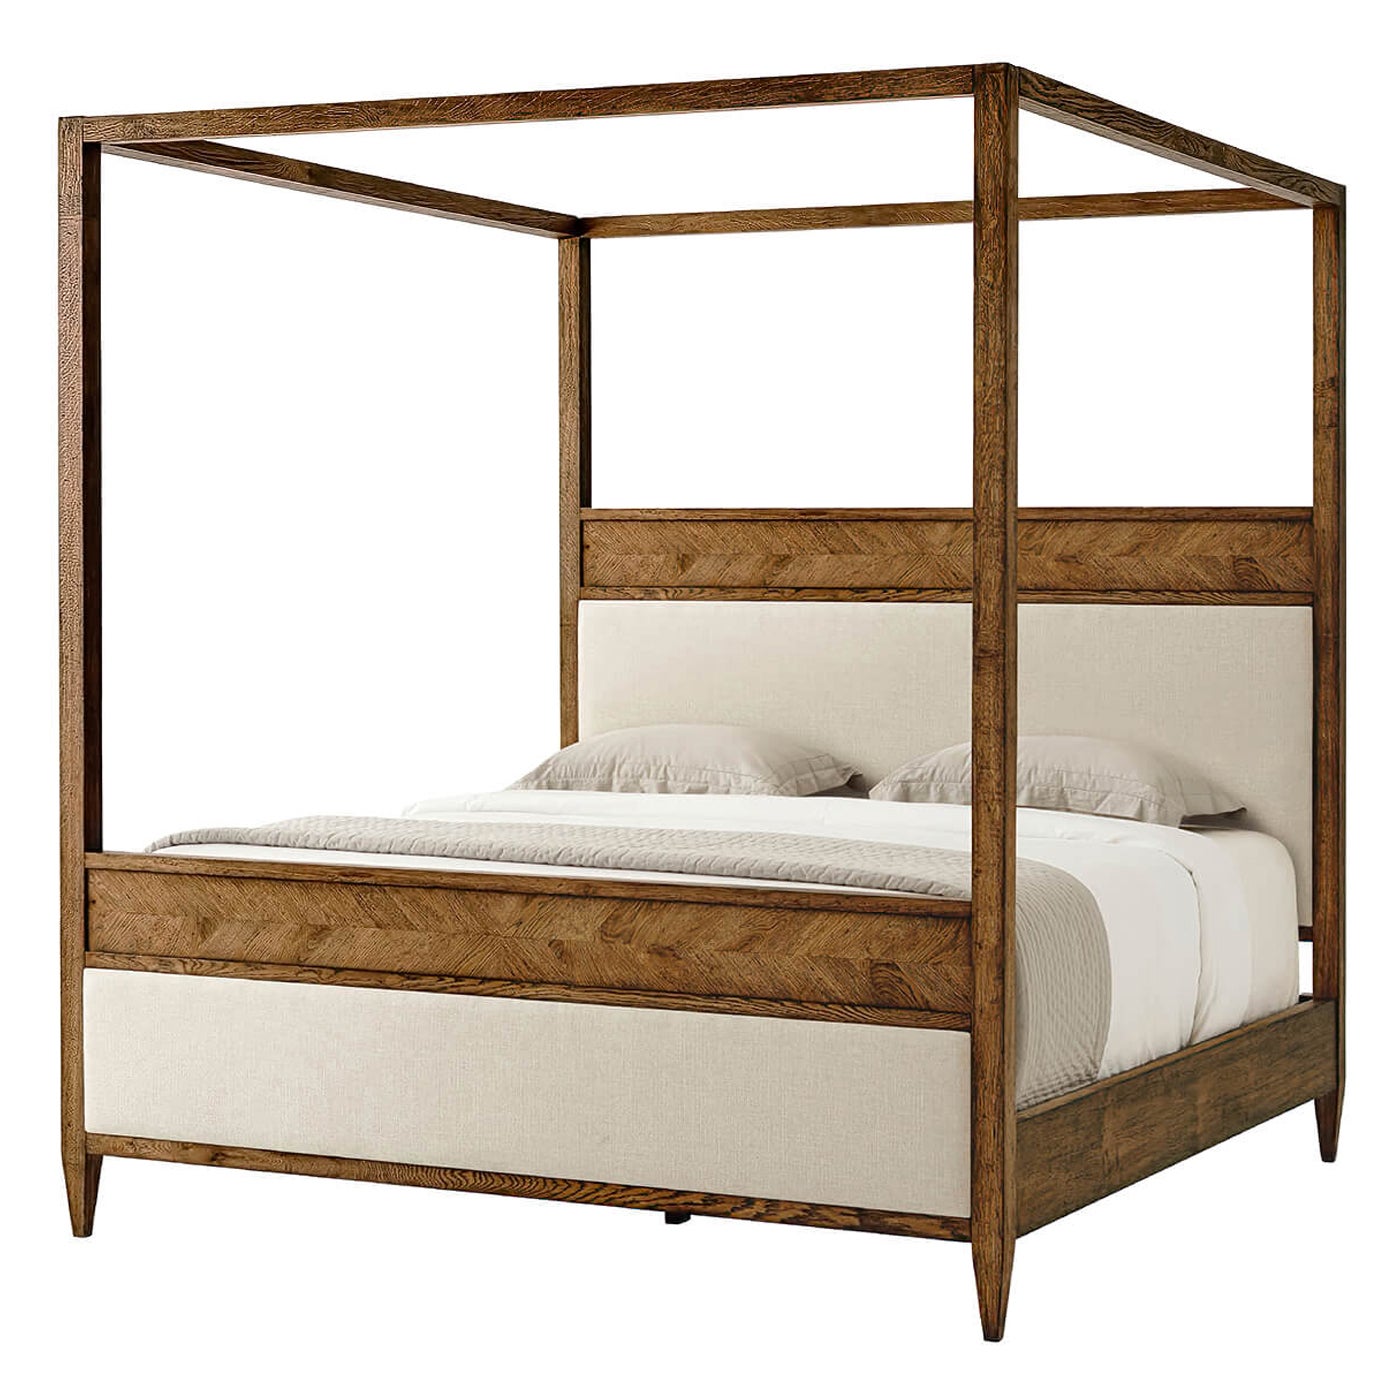 Modern Rustic Canopy King Bed